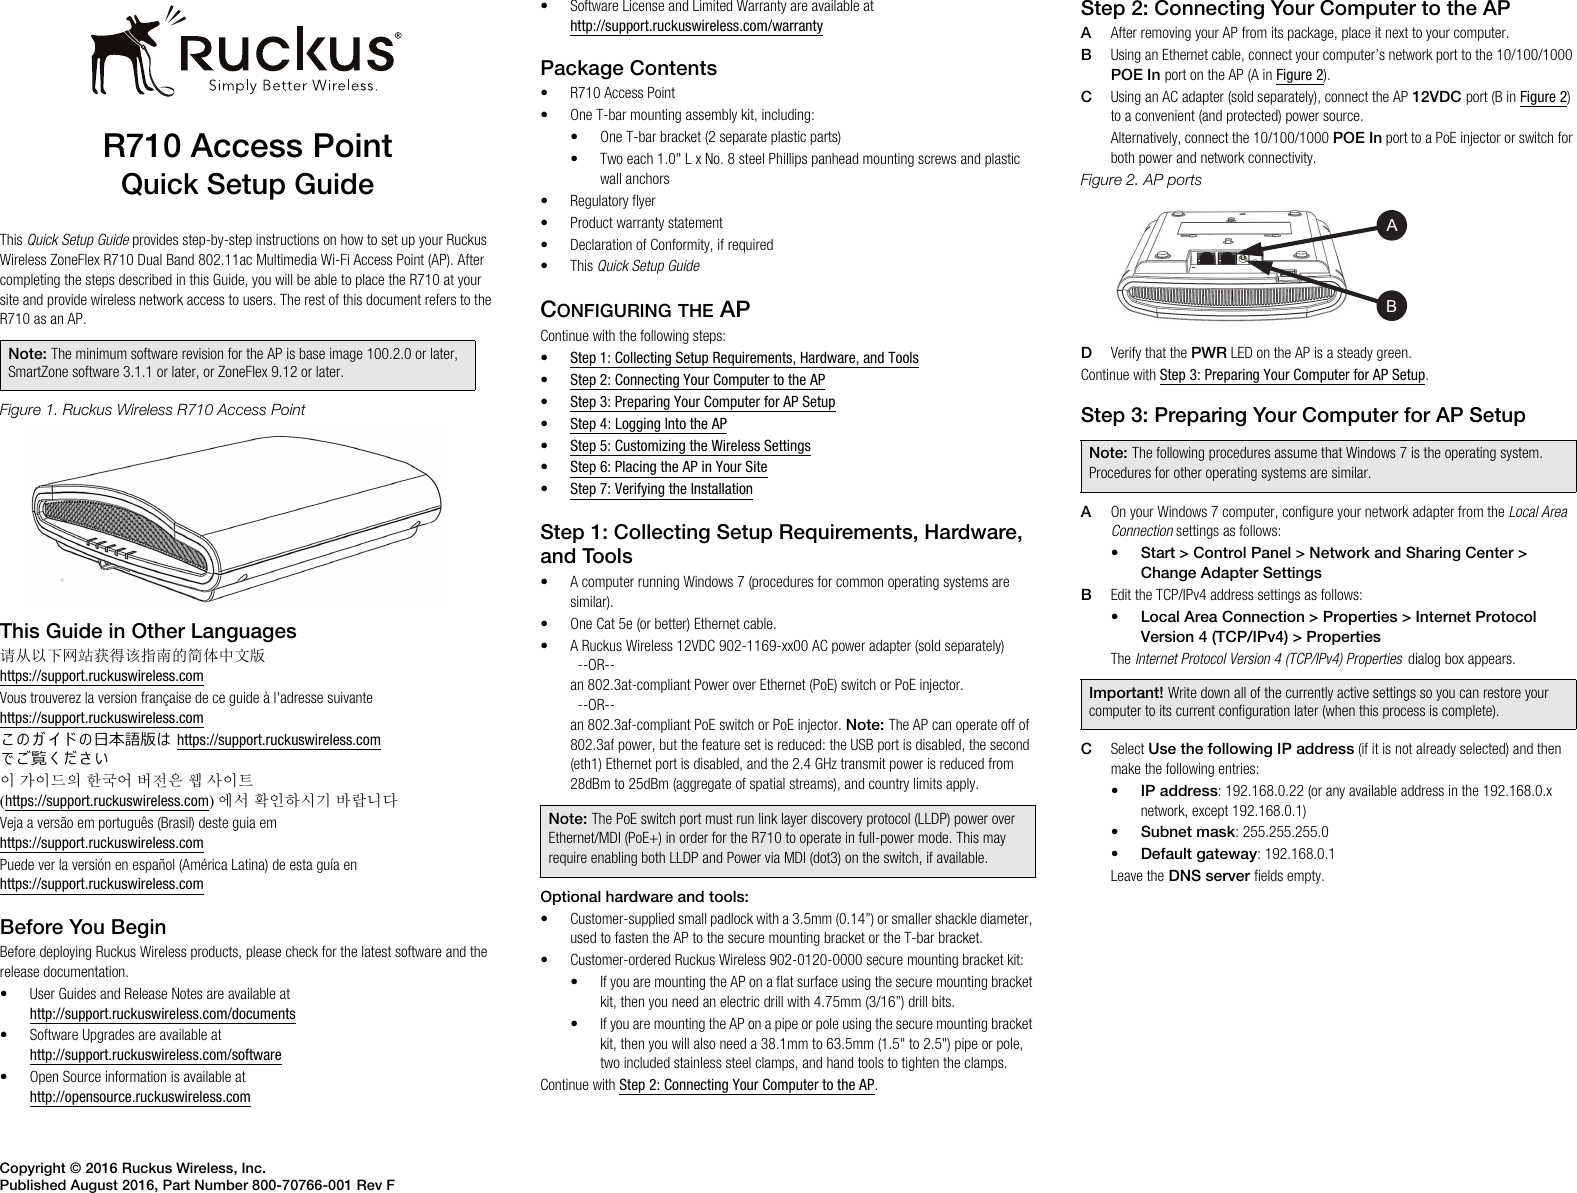 Page 1 of 4 - Ruckus R710 Access Point Quick Setup Guide Wireless R710-QSG-800-70766-001-Rev F-20160819-1